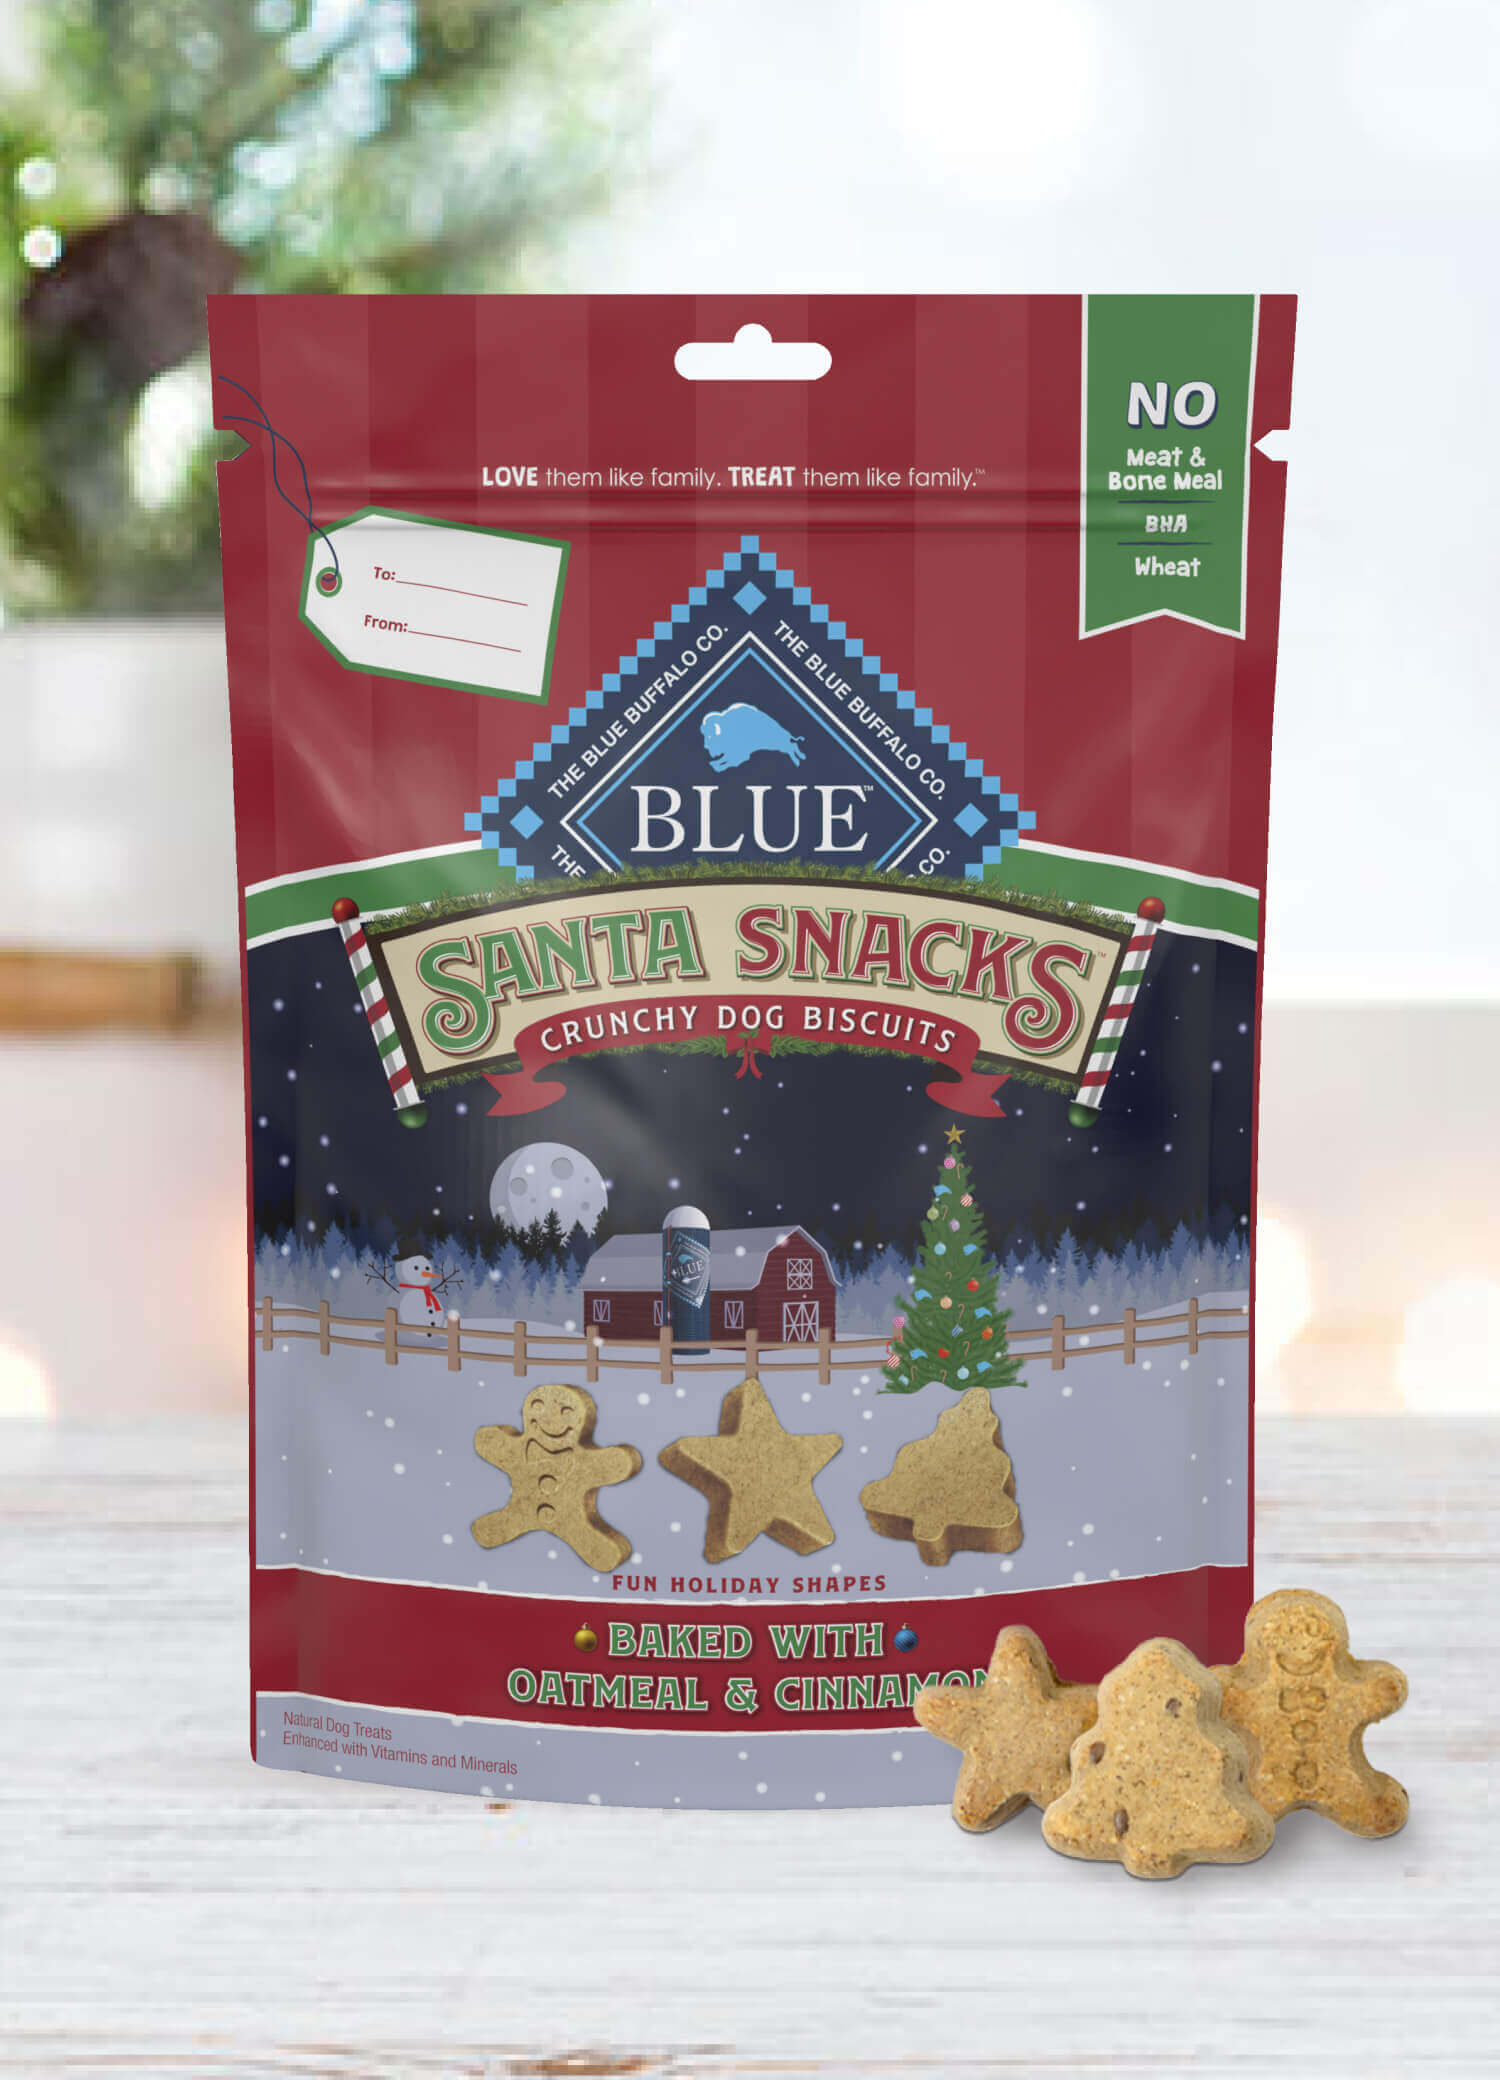 blue santa snacks crunchy dog biscuits in fun holiday shapes dog treats